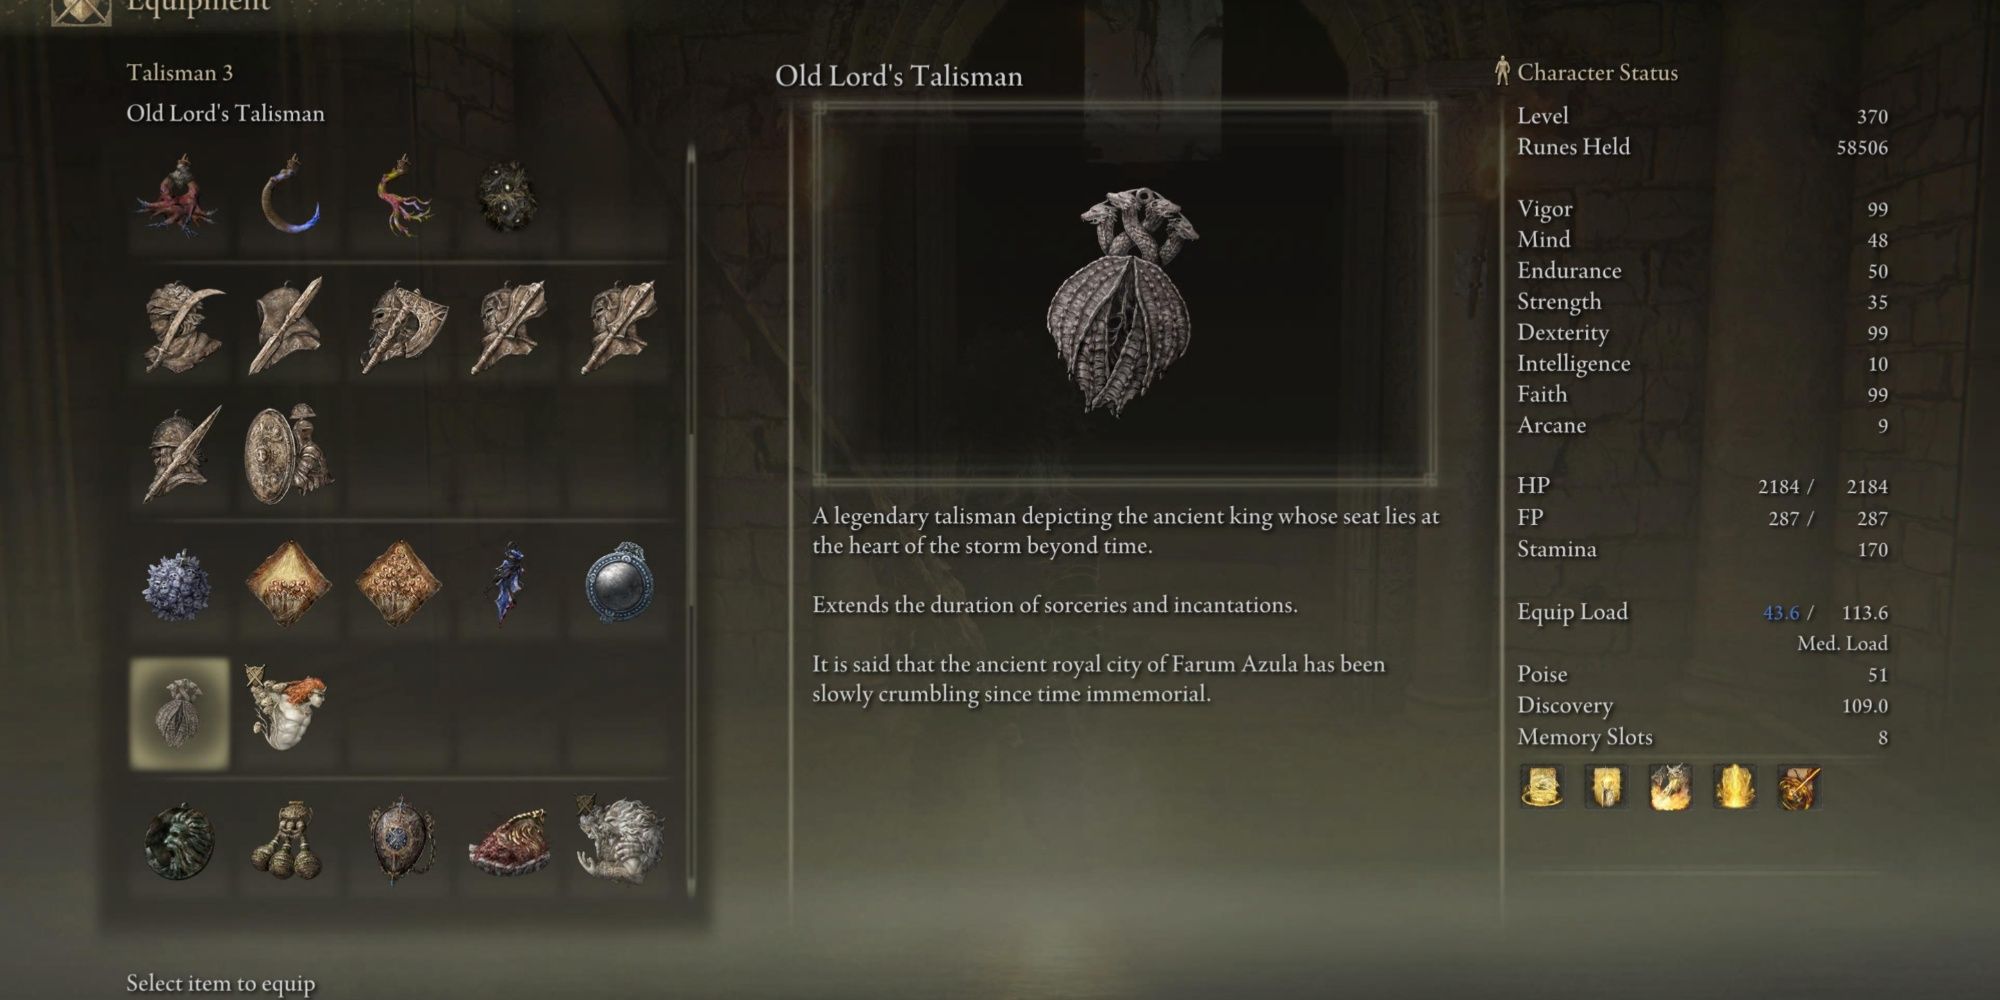 Old Lord's Talisman's Information in Elden Ring